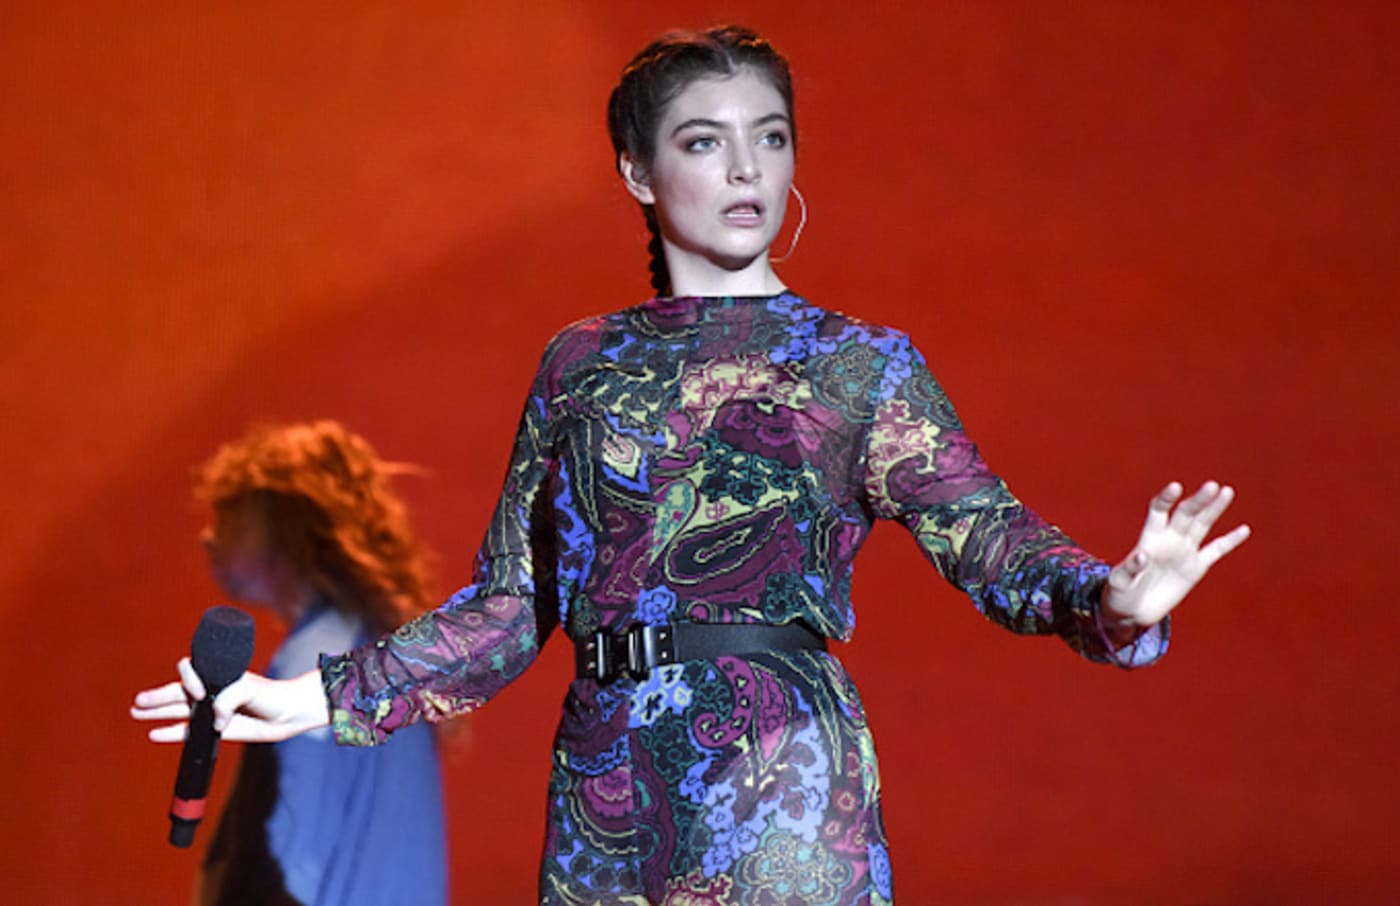 Lorde performs during the 2017 Bonnaroo